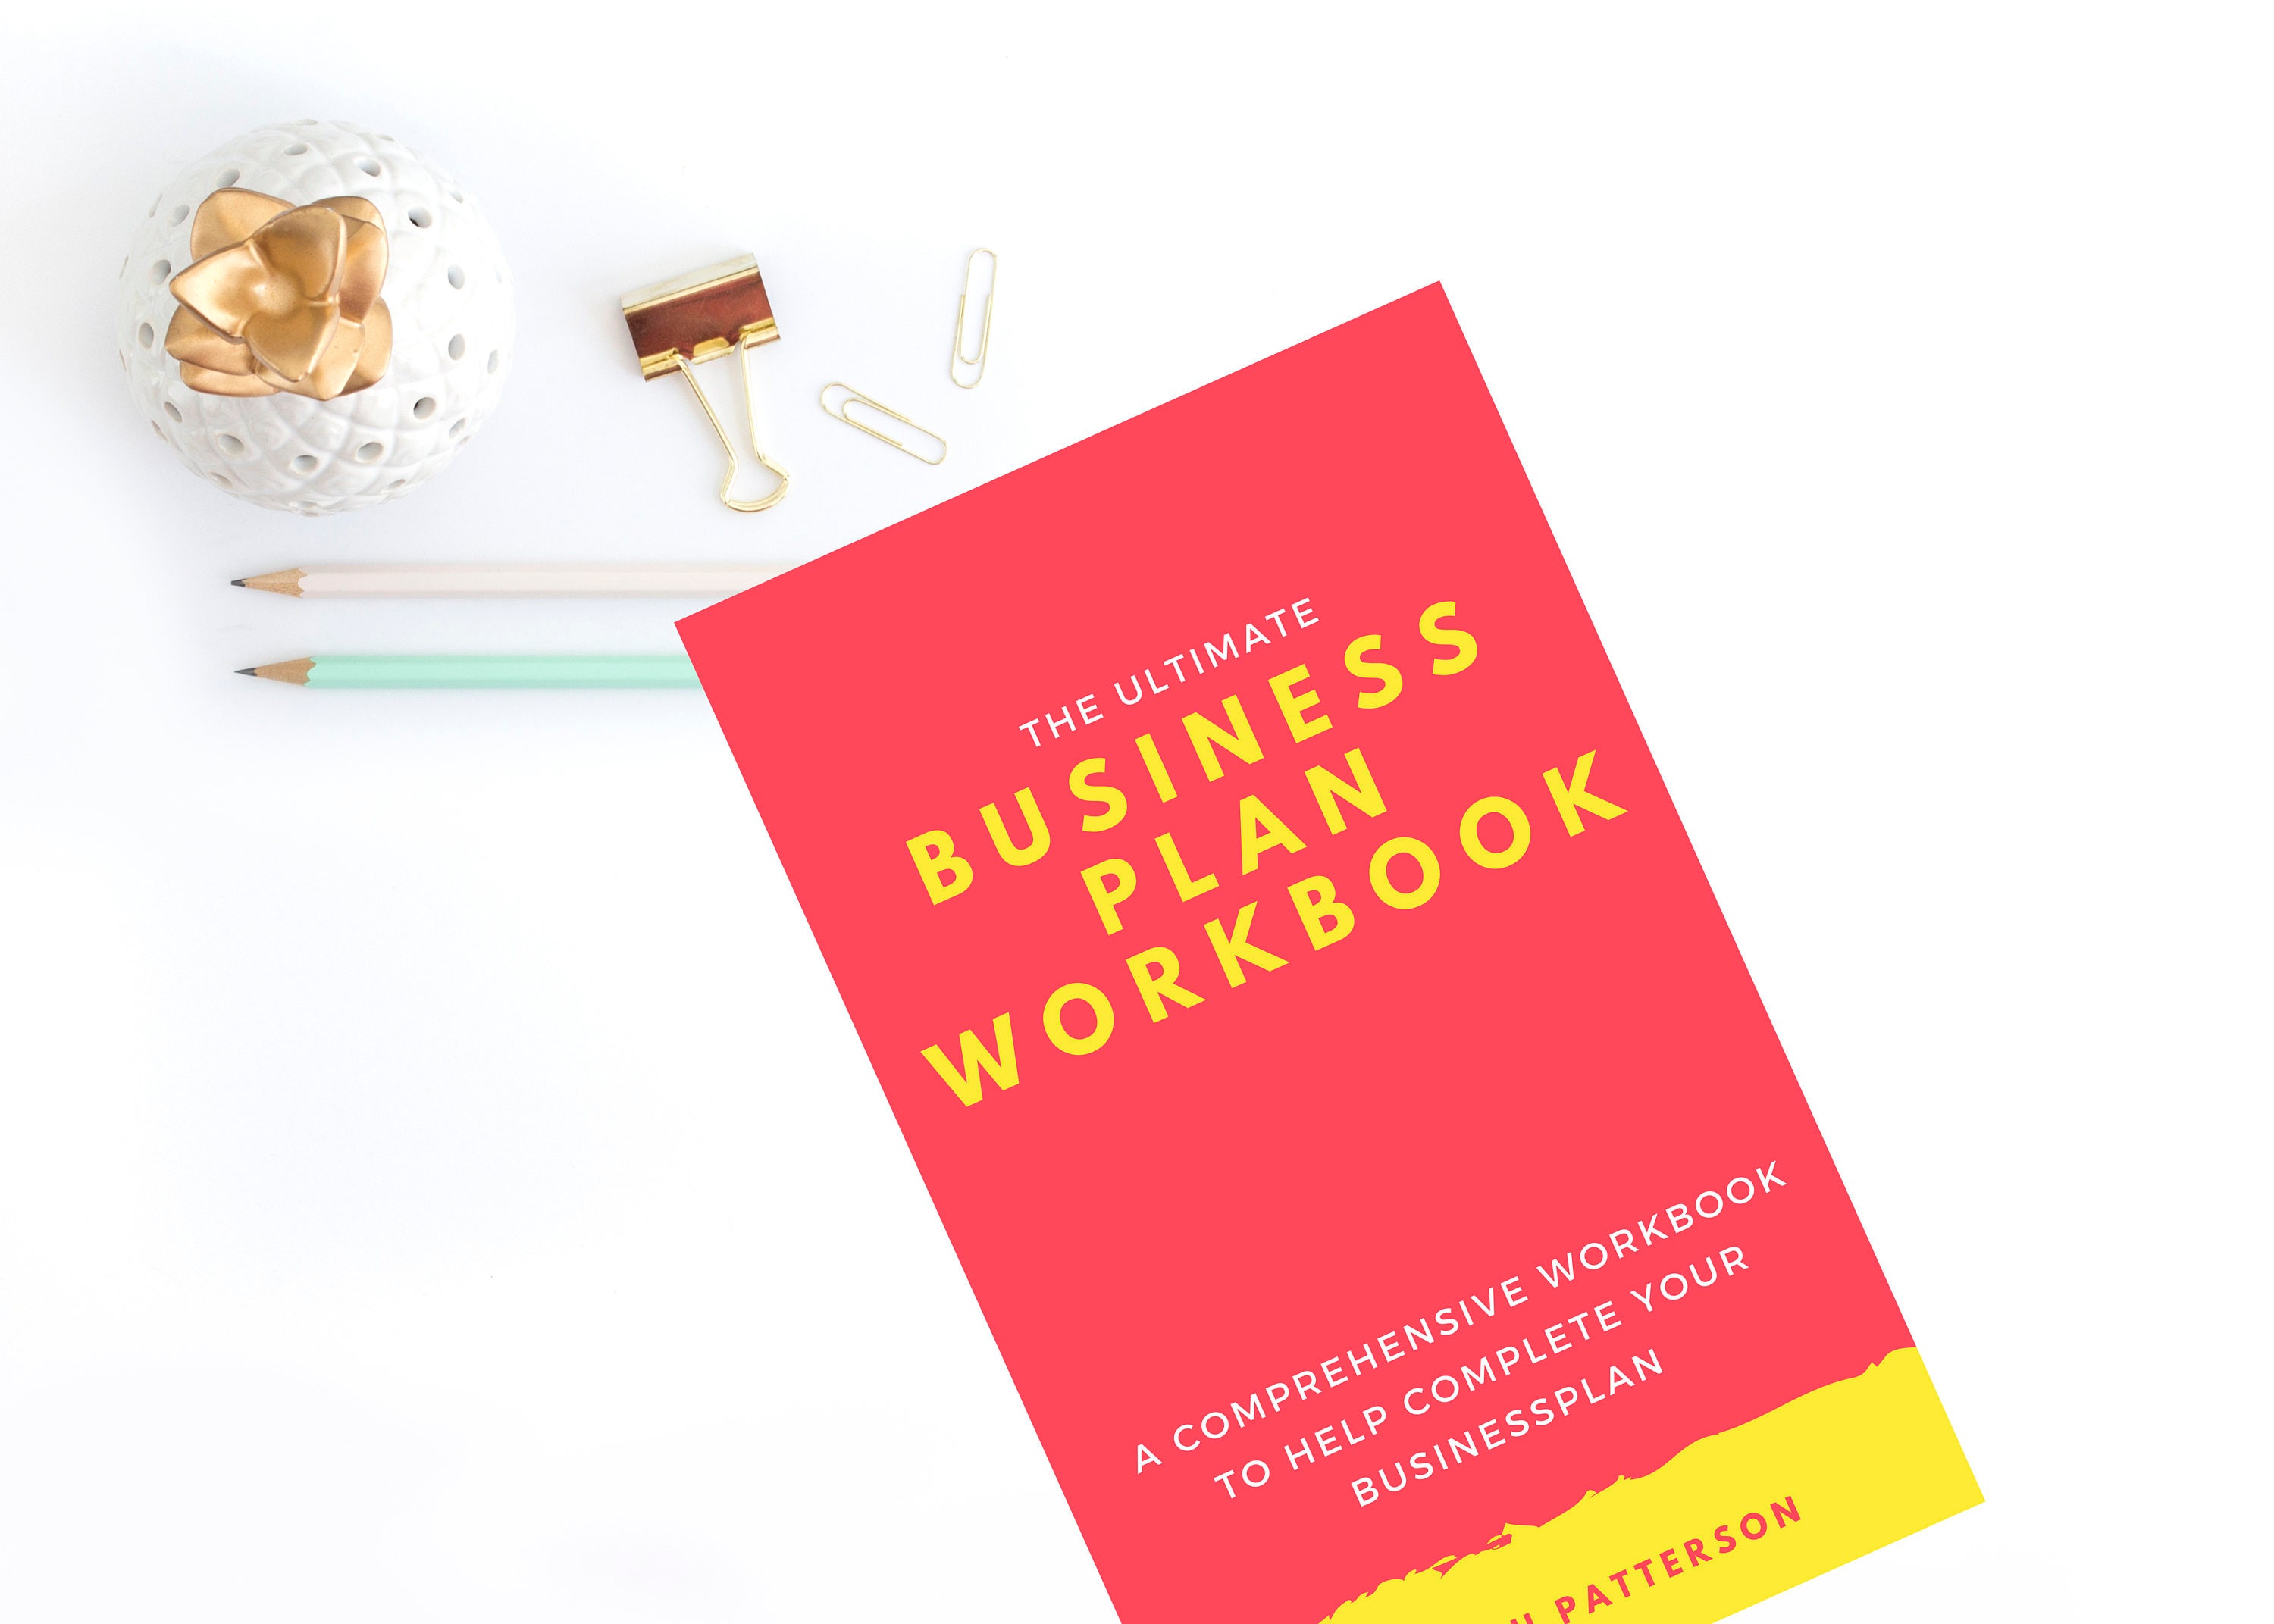 the business plan book